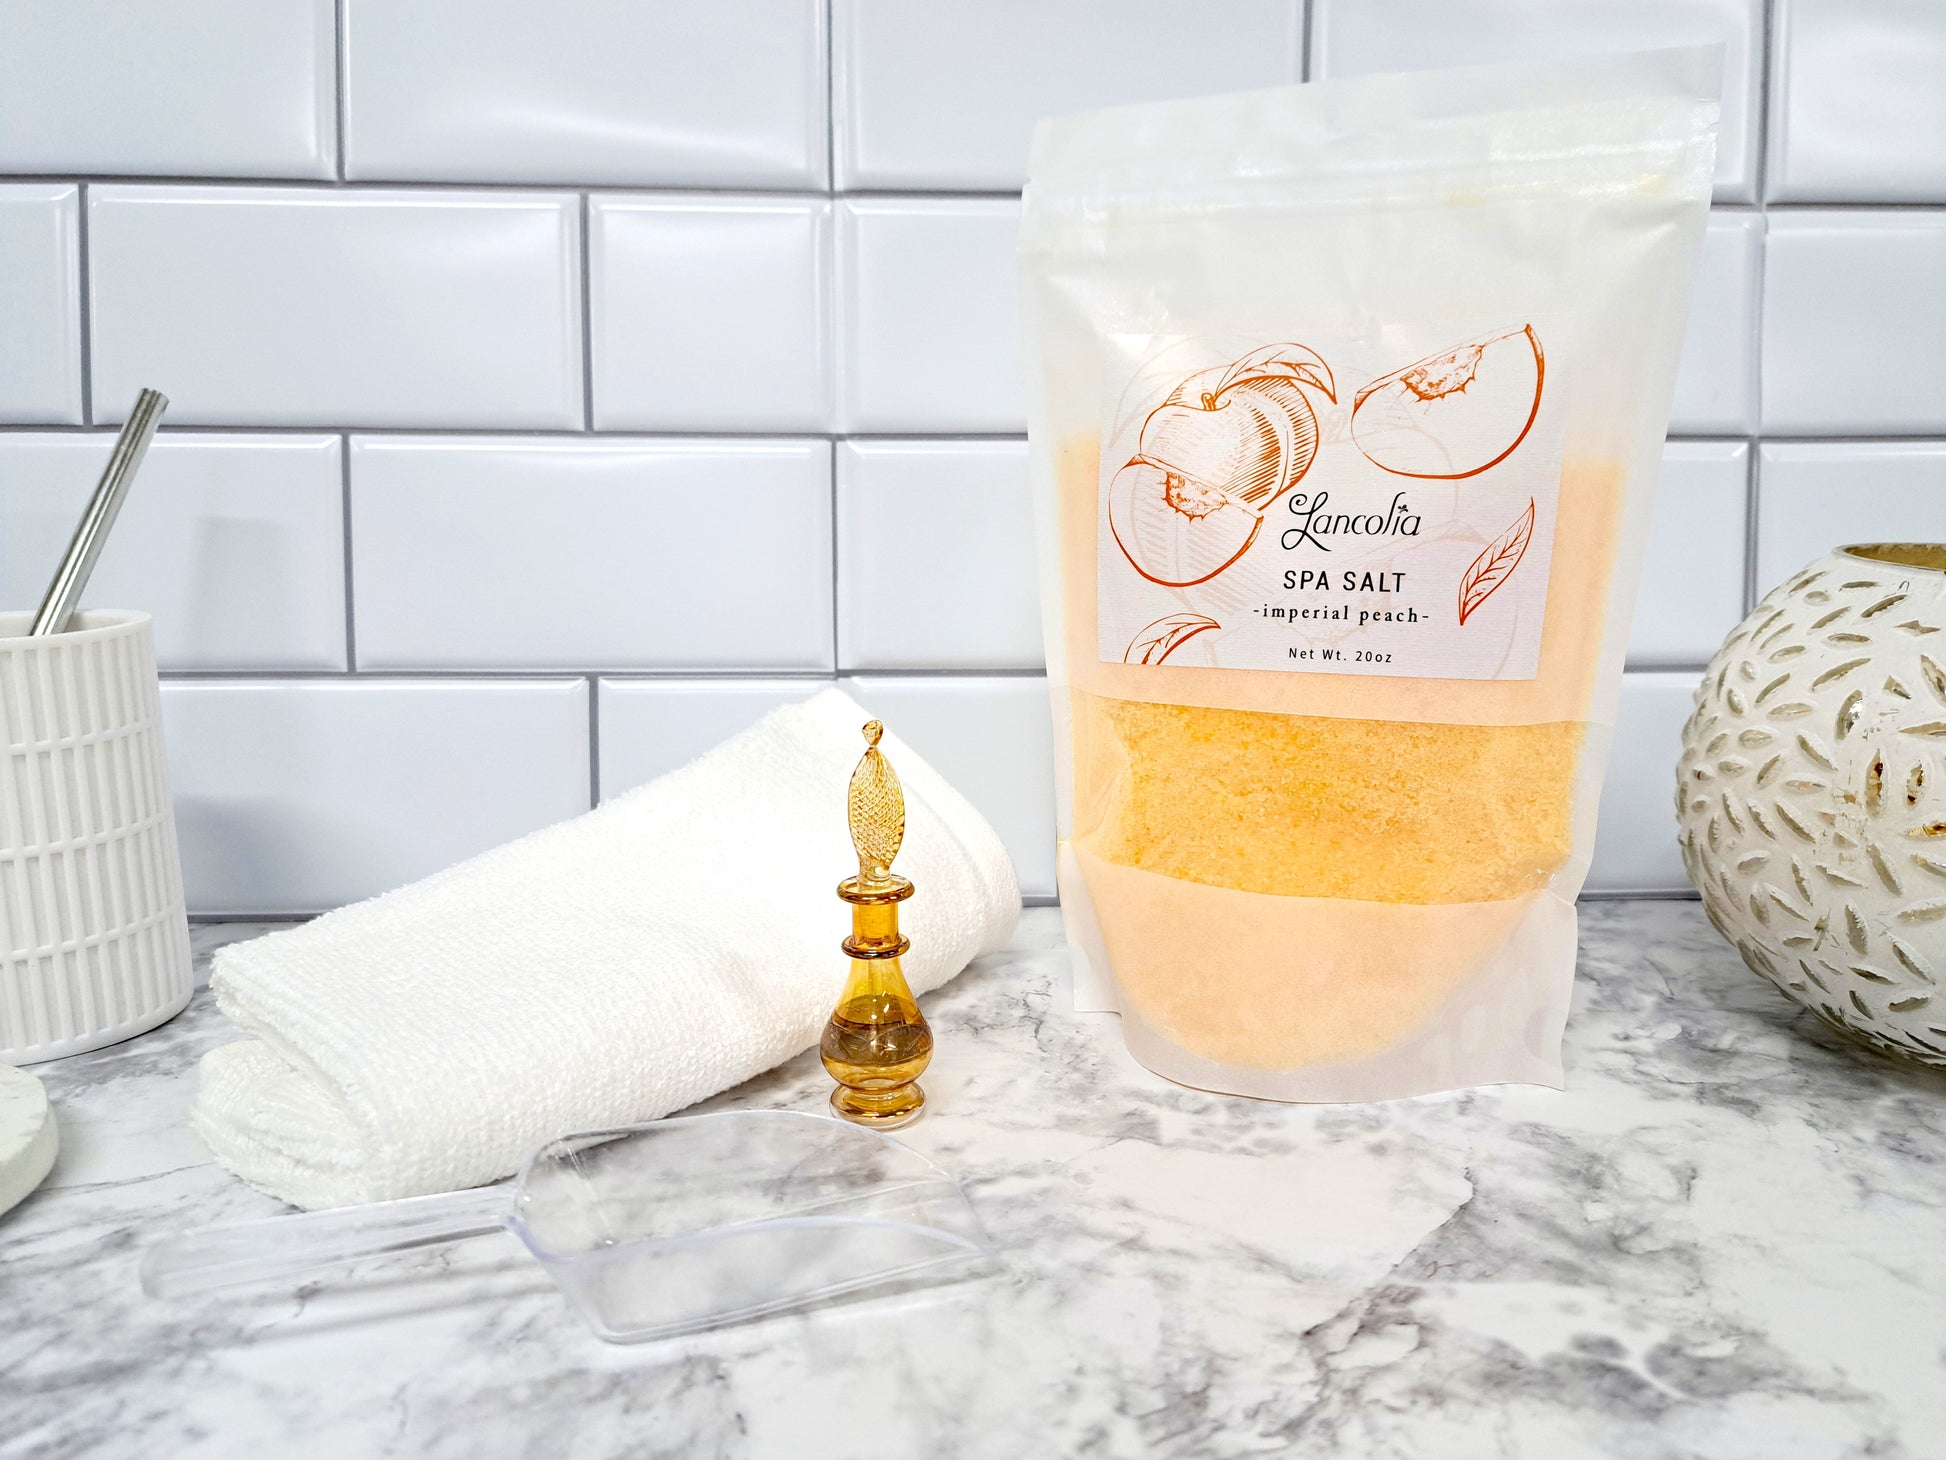 Epsom salts for bath with our peach signature scent Imperial Peach